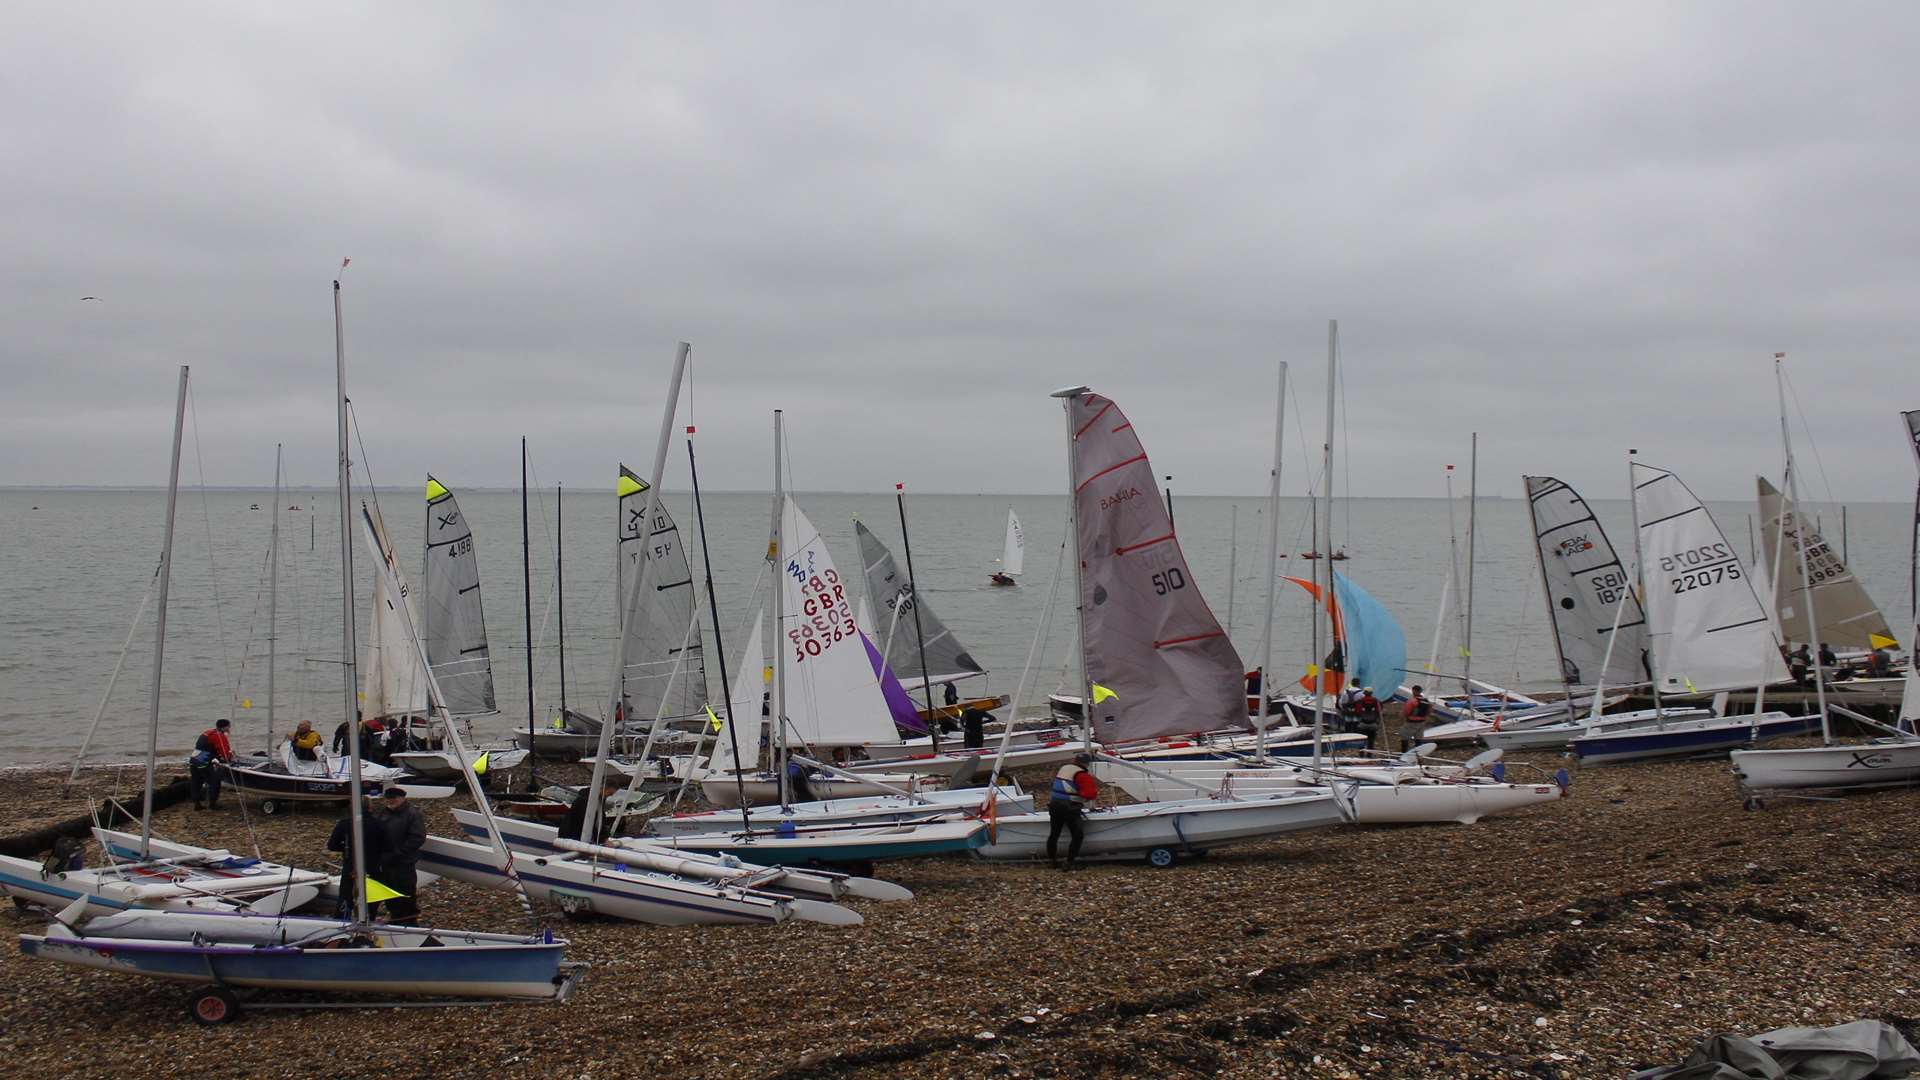 Participants get ready on the beach for the start of the 2015 Round The Island Race. Picture: Tony Stigle